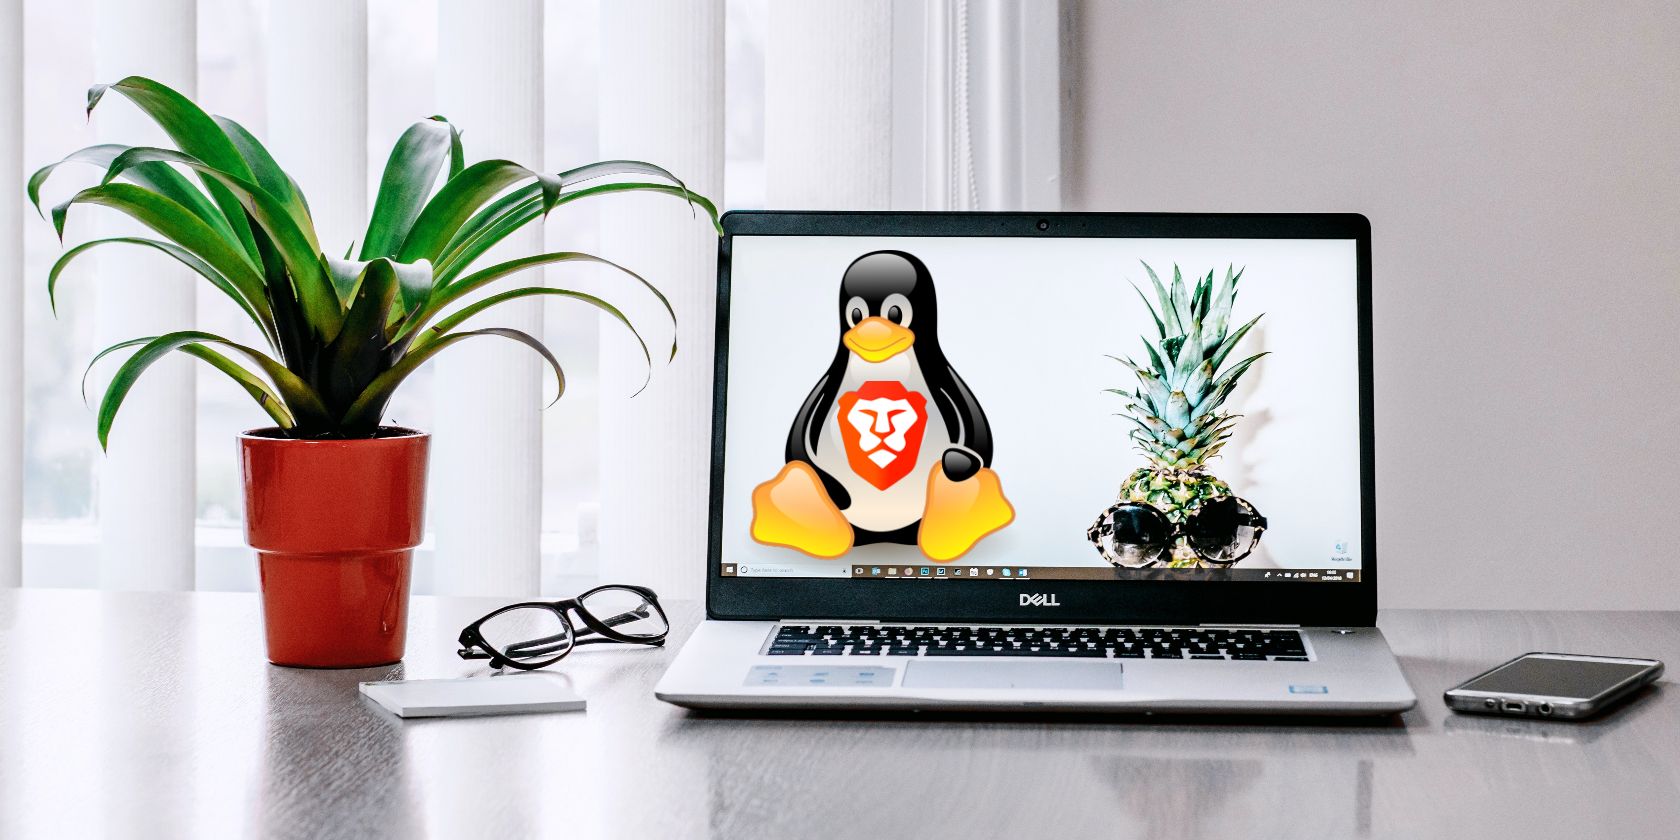 laptop with Linux and Brave's logos embedded